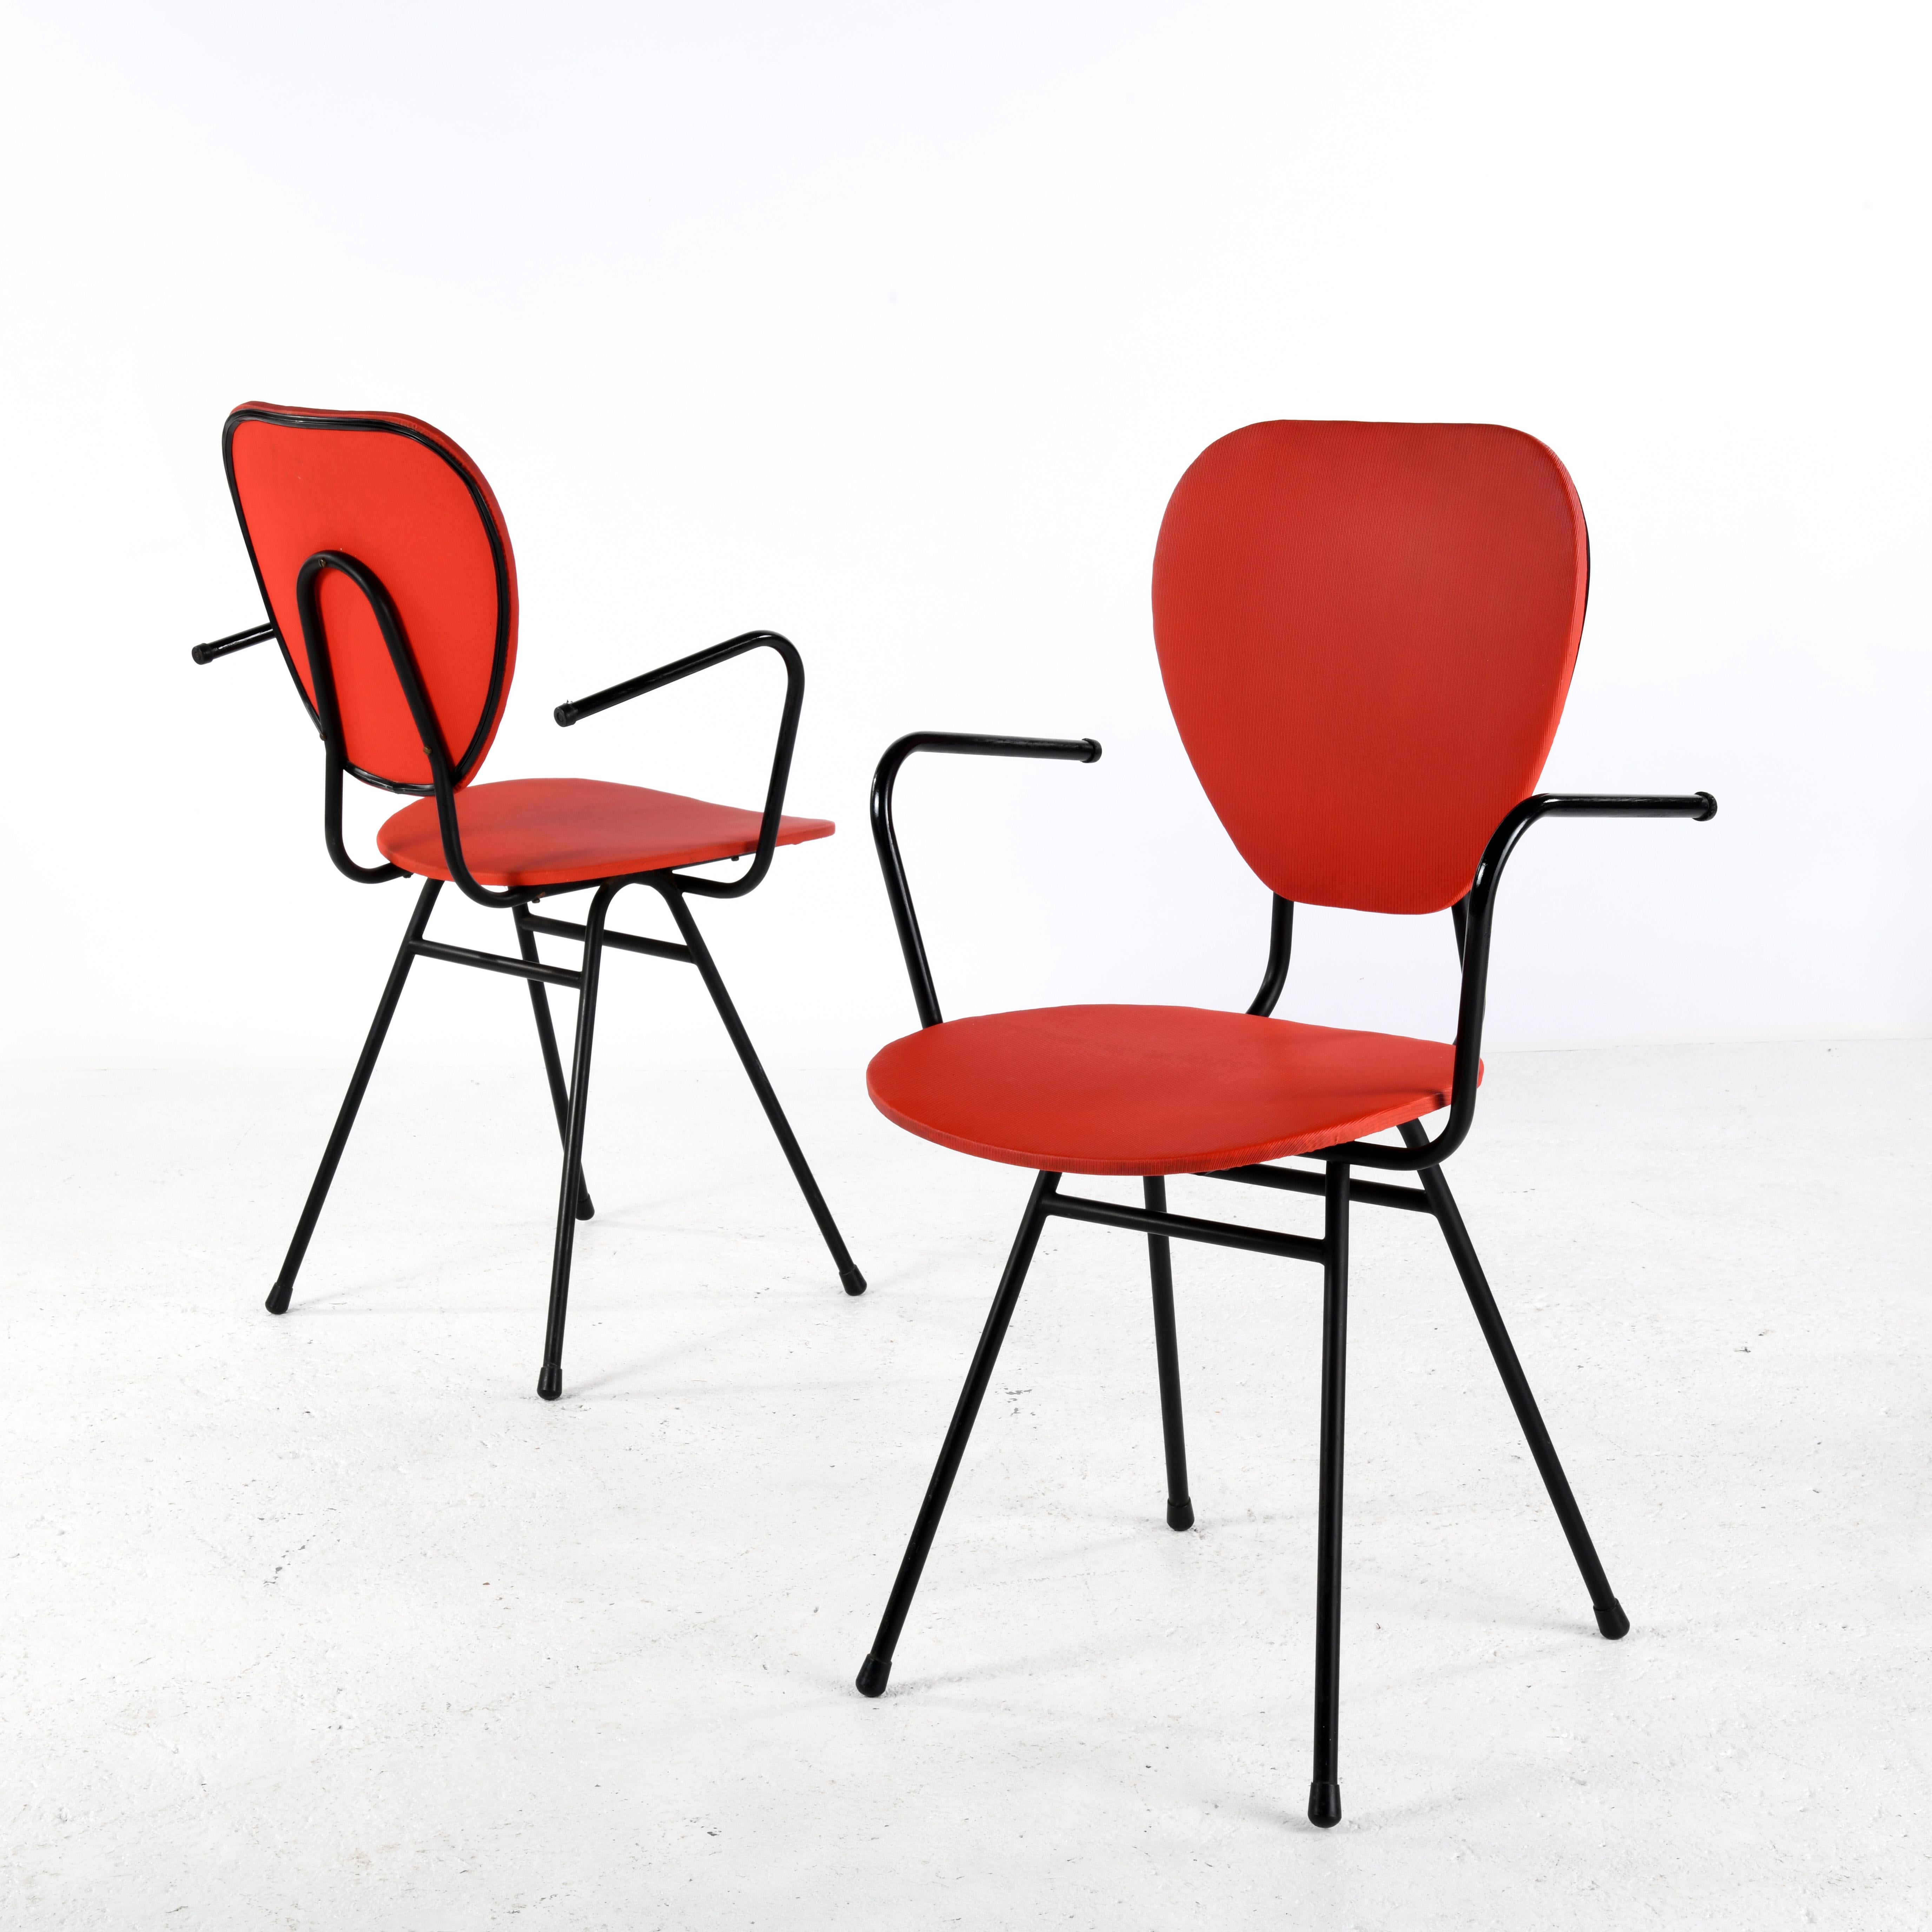 Steel Pair of chairs with armrests by Jacques Hitier, published in France in the 1950 For Sale